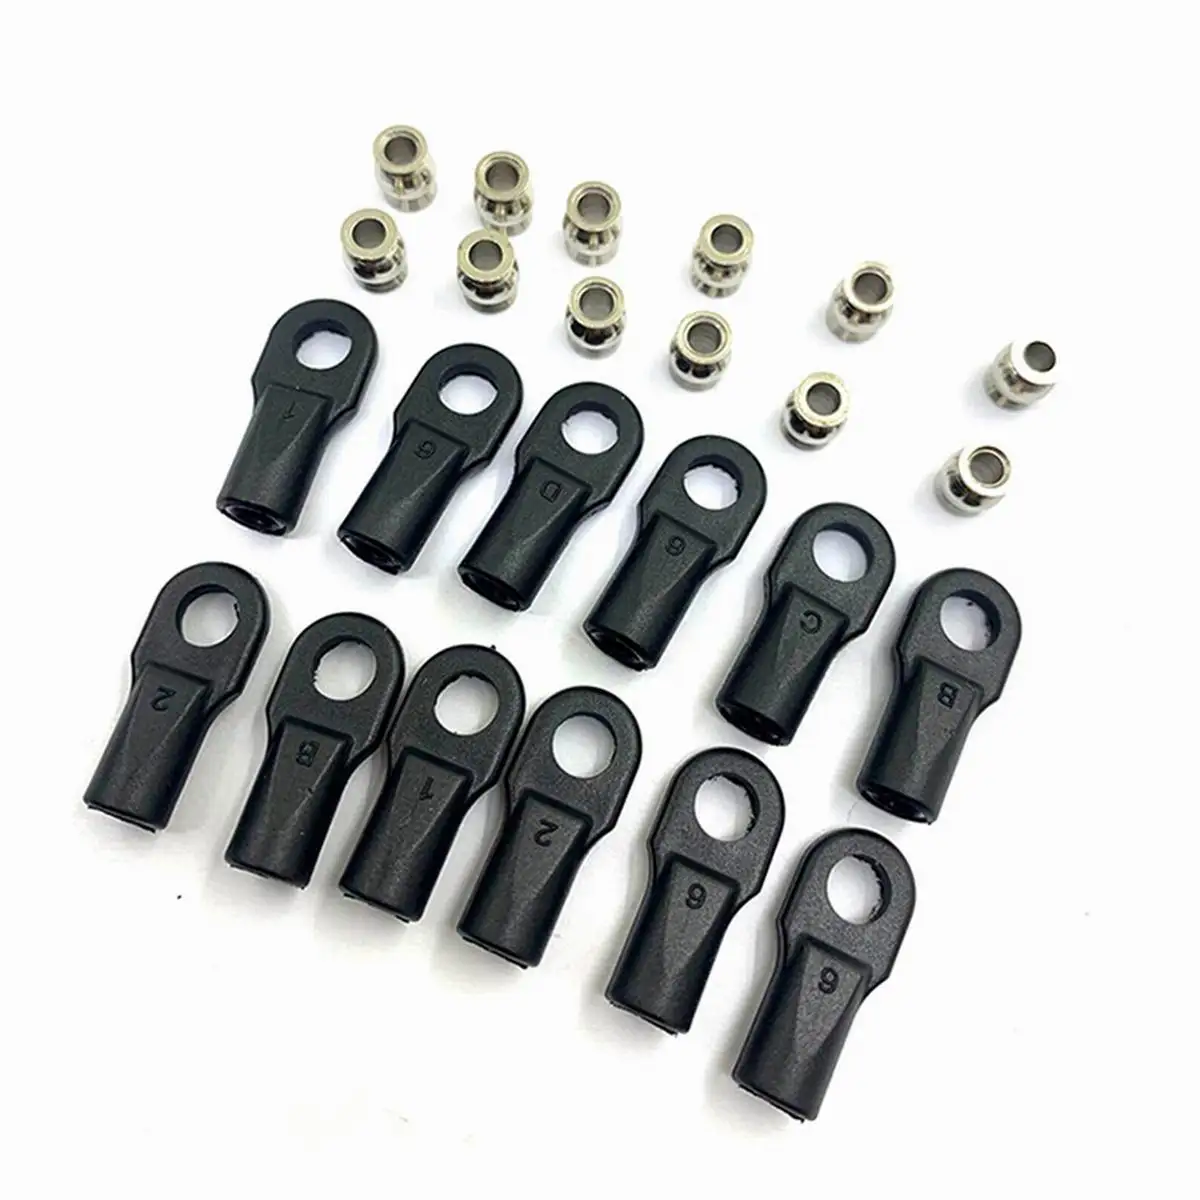 

12pcs Large Rod Ends /w Hollow Balls Rostock Kossel Mini for Traxxas 1/10 E-REVO SUMMIT 5347 Arms-Makes RC Car Accessories